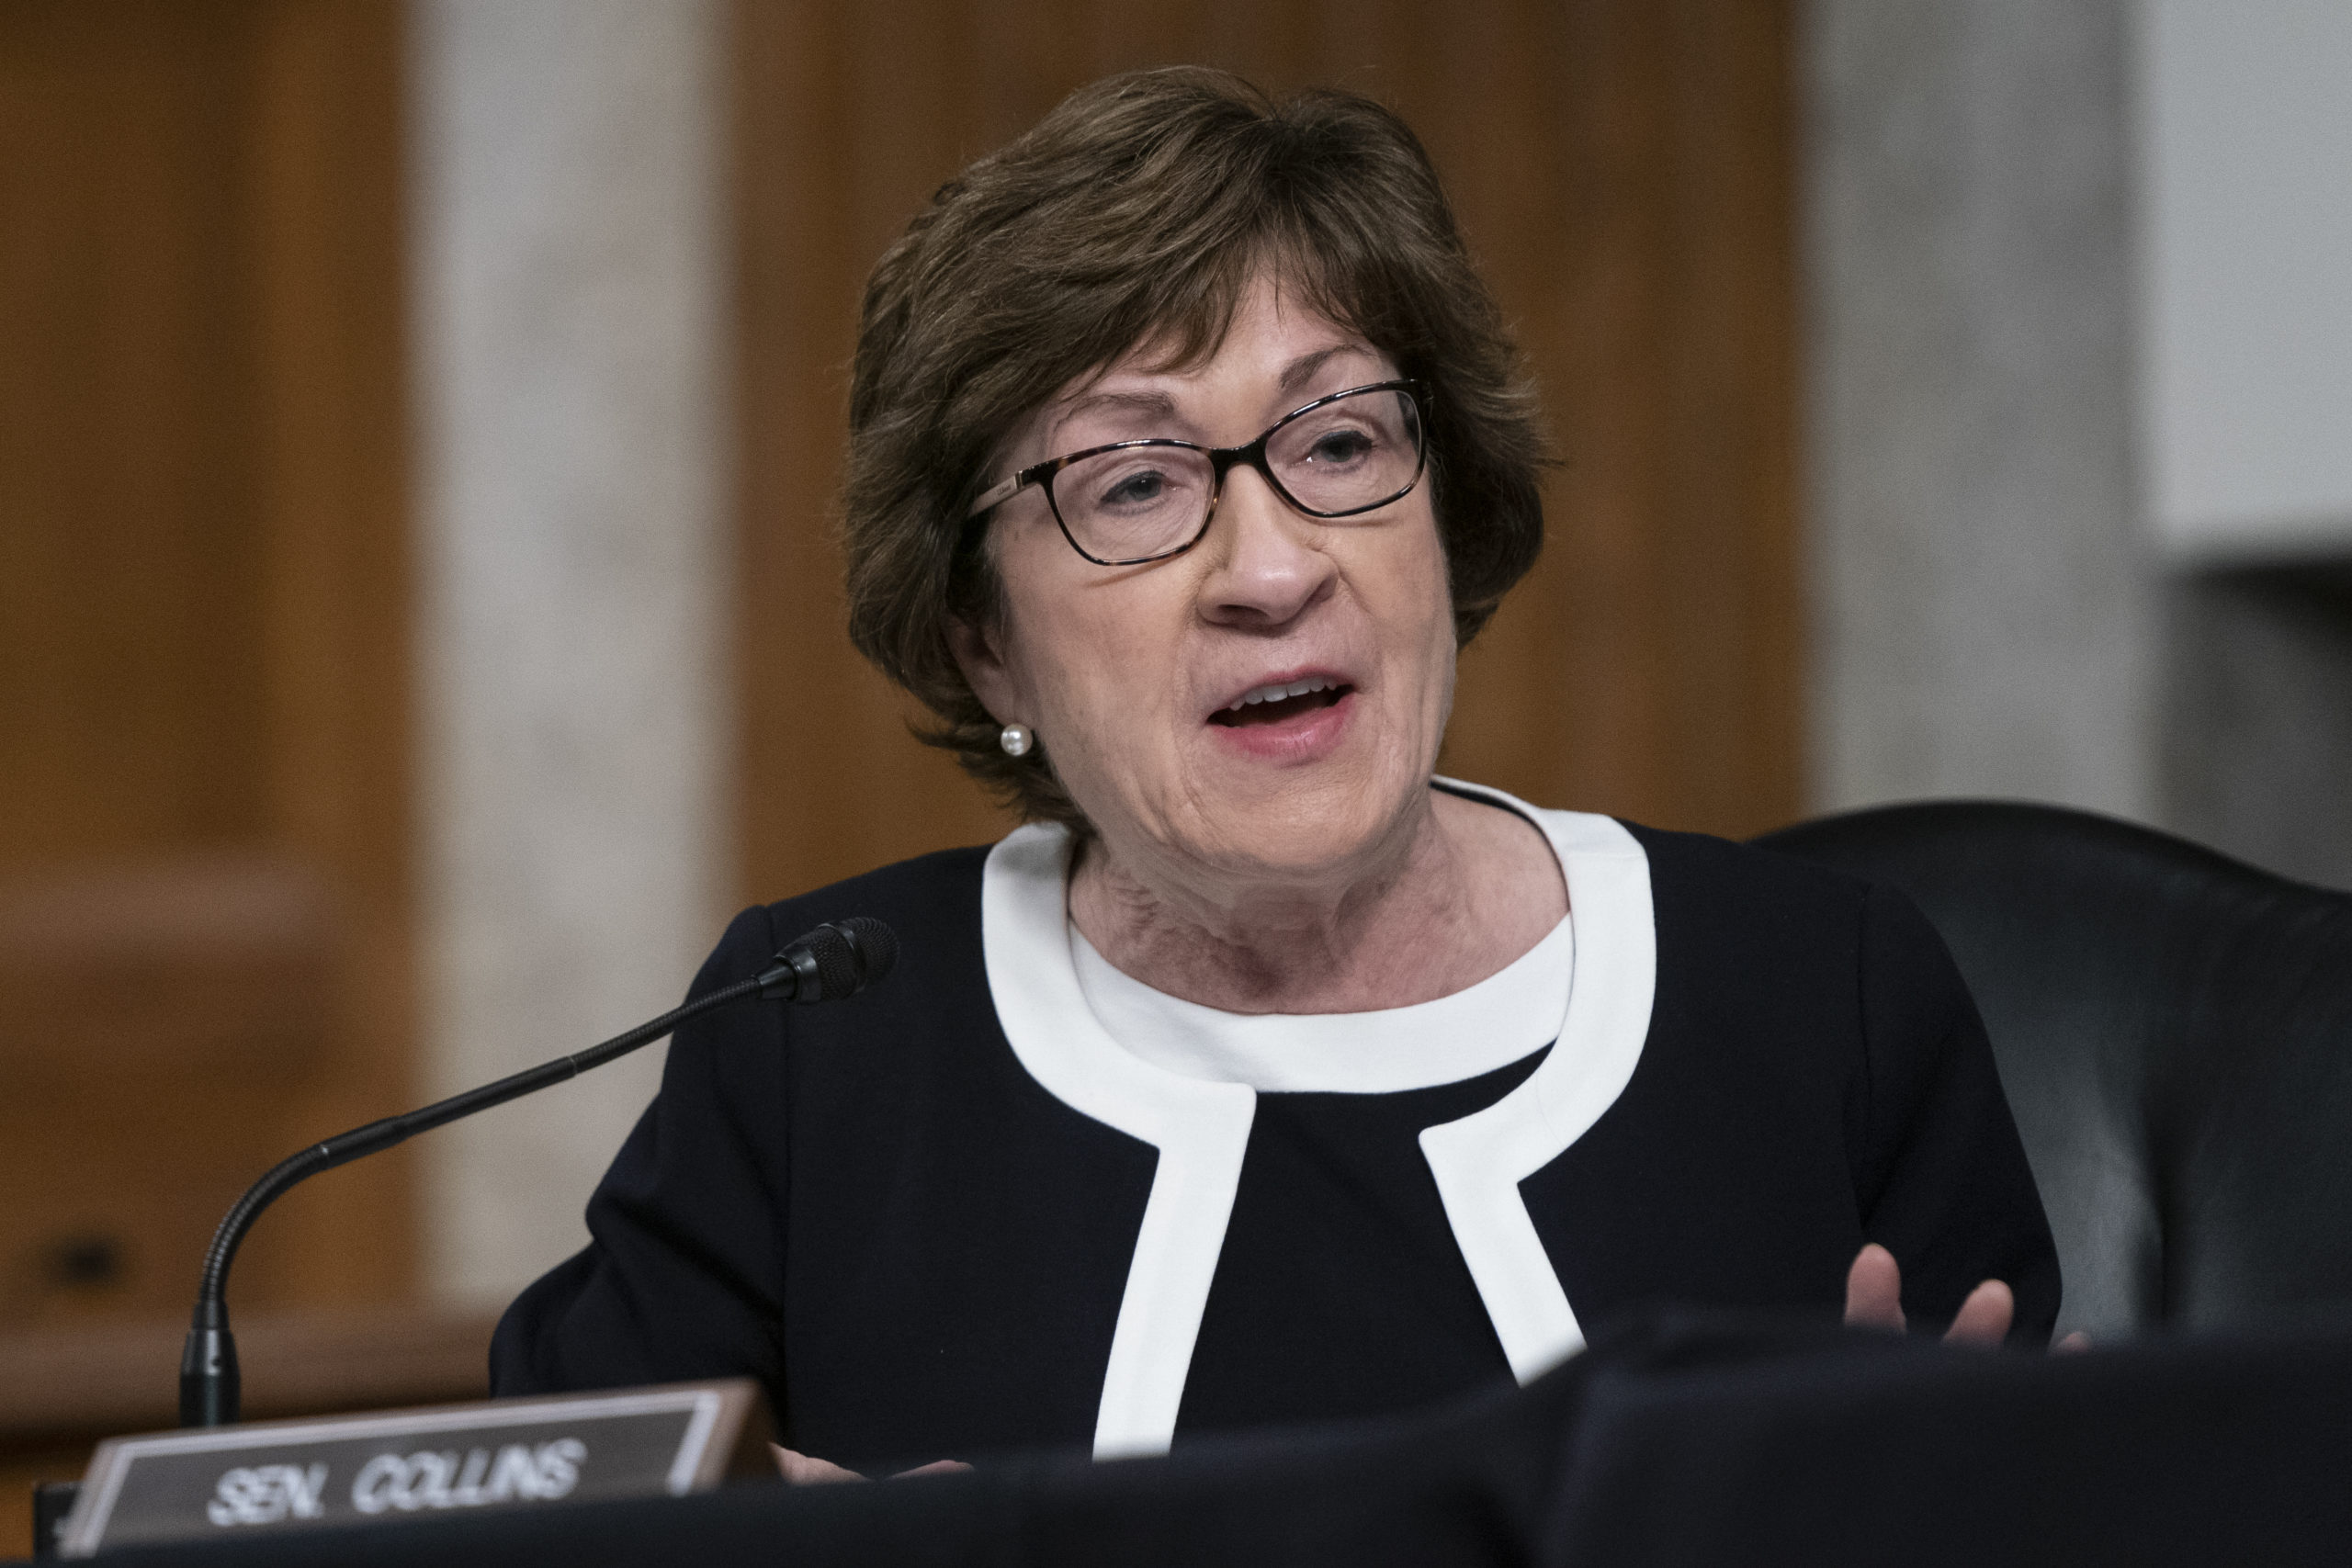 WASHINGTON, DC - SEPTEMBER 23: U.S. Sen. Susan Collins (R-ME) speaks at a hearing of the Senate Health, Education, Labor and Pensions Committee on September 23, 2020 in Washington, DC. The committee is examining the federal response to the coronavirus pandemic. (Photo by Alex Edelman-Pool/Getty Images)